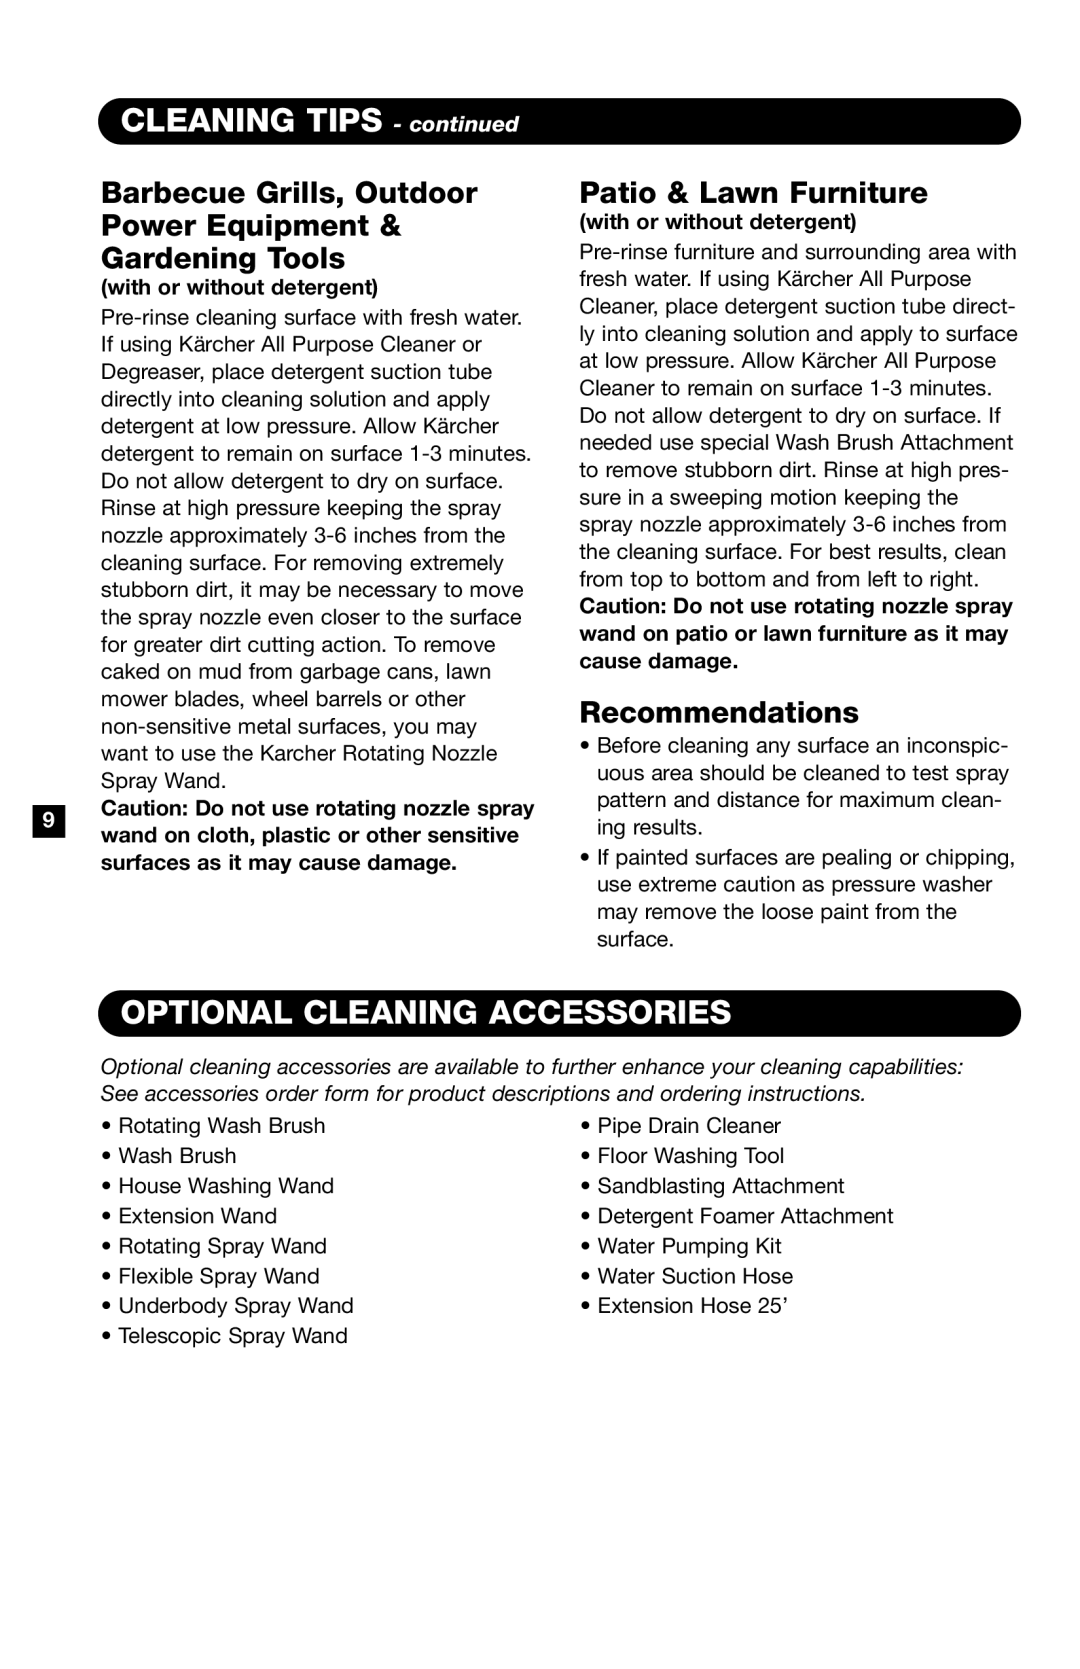 Karcher K4400G CLEANING TIPS - continued, Optional Cleaning Accessories, Barbecue Grills, Outdoor Power Equipment 